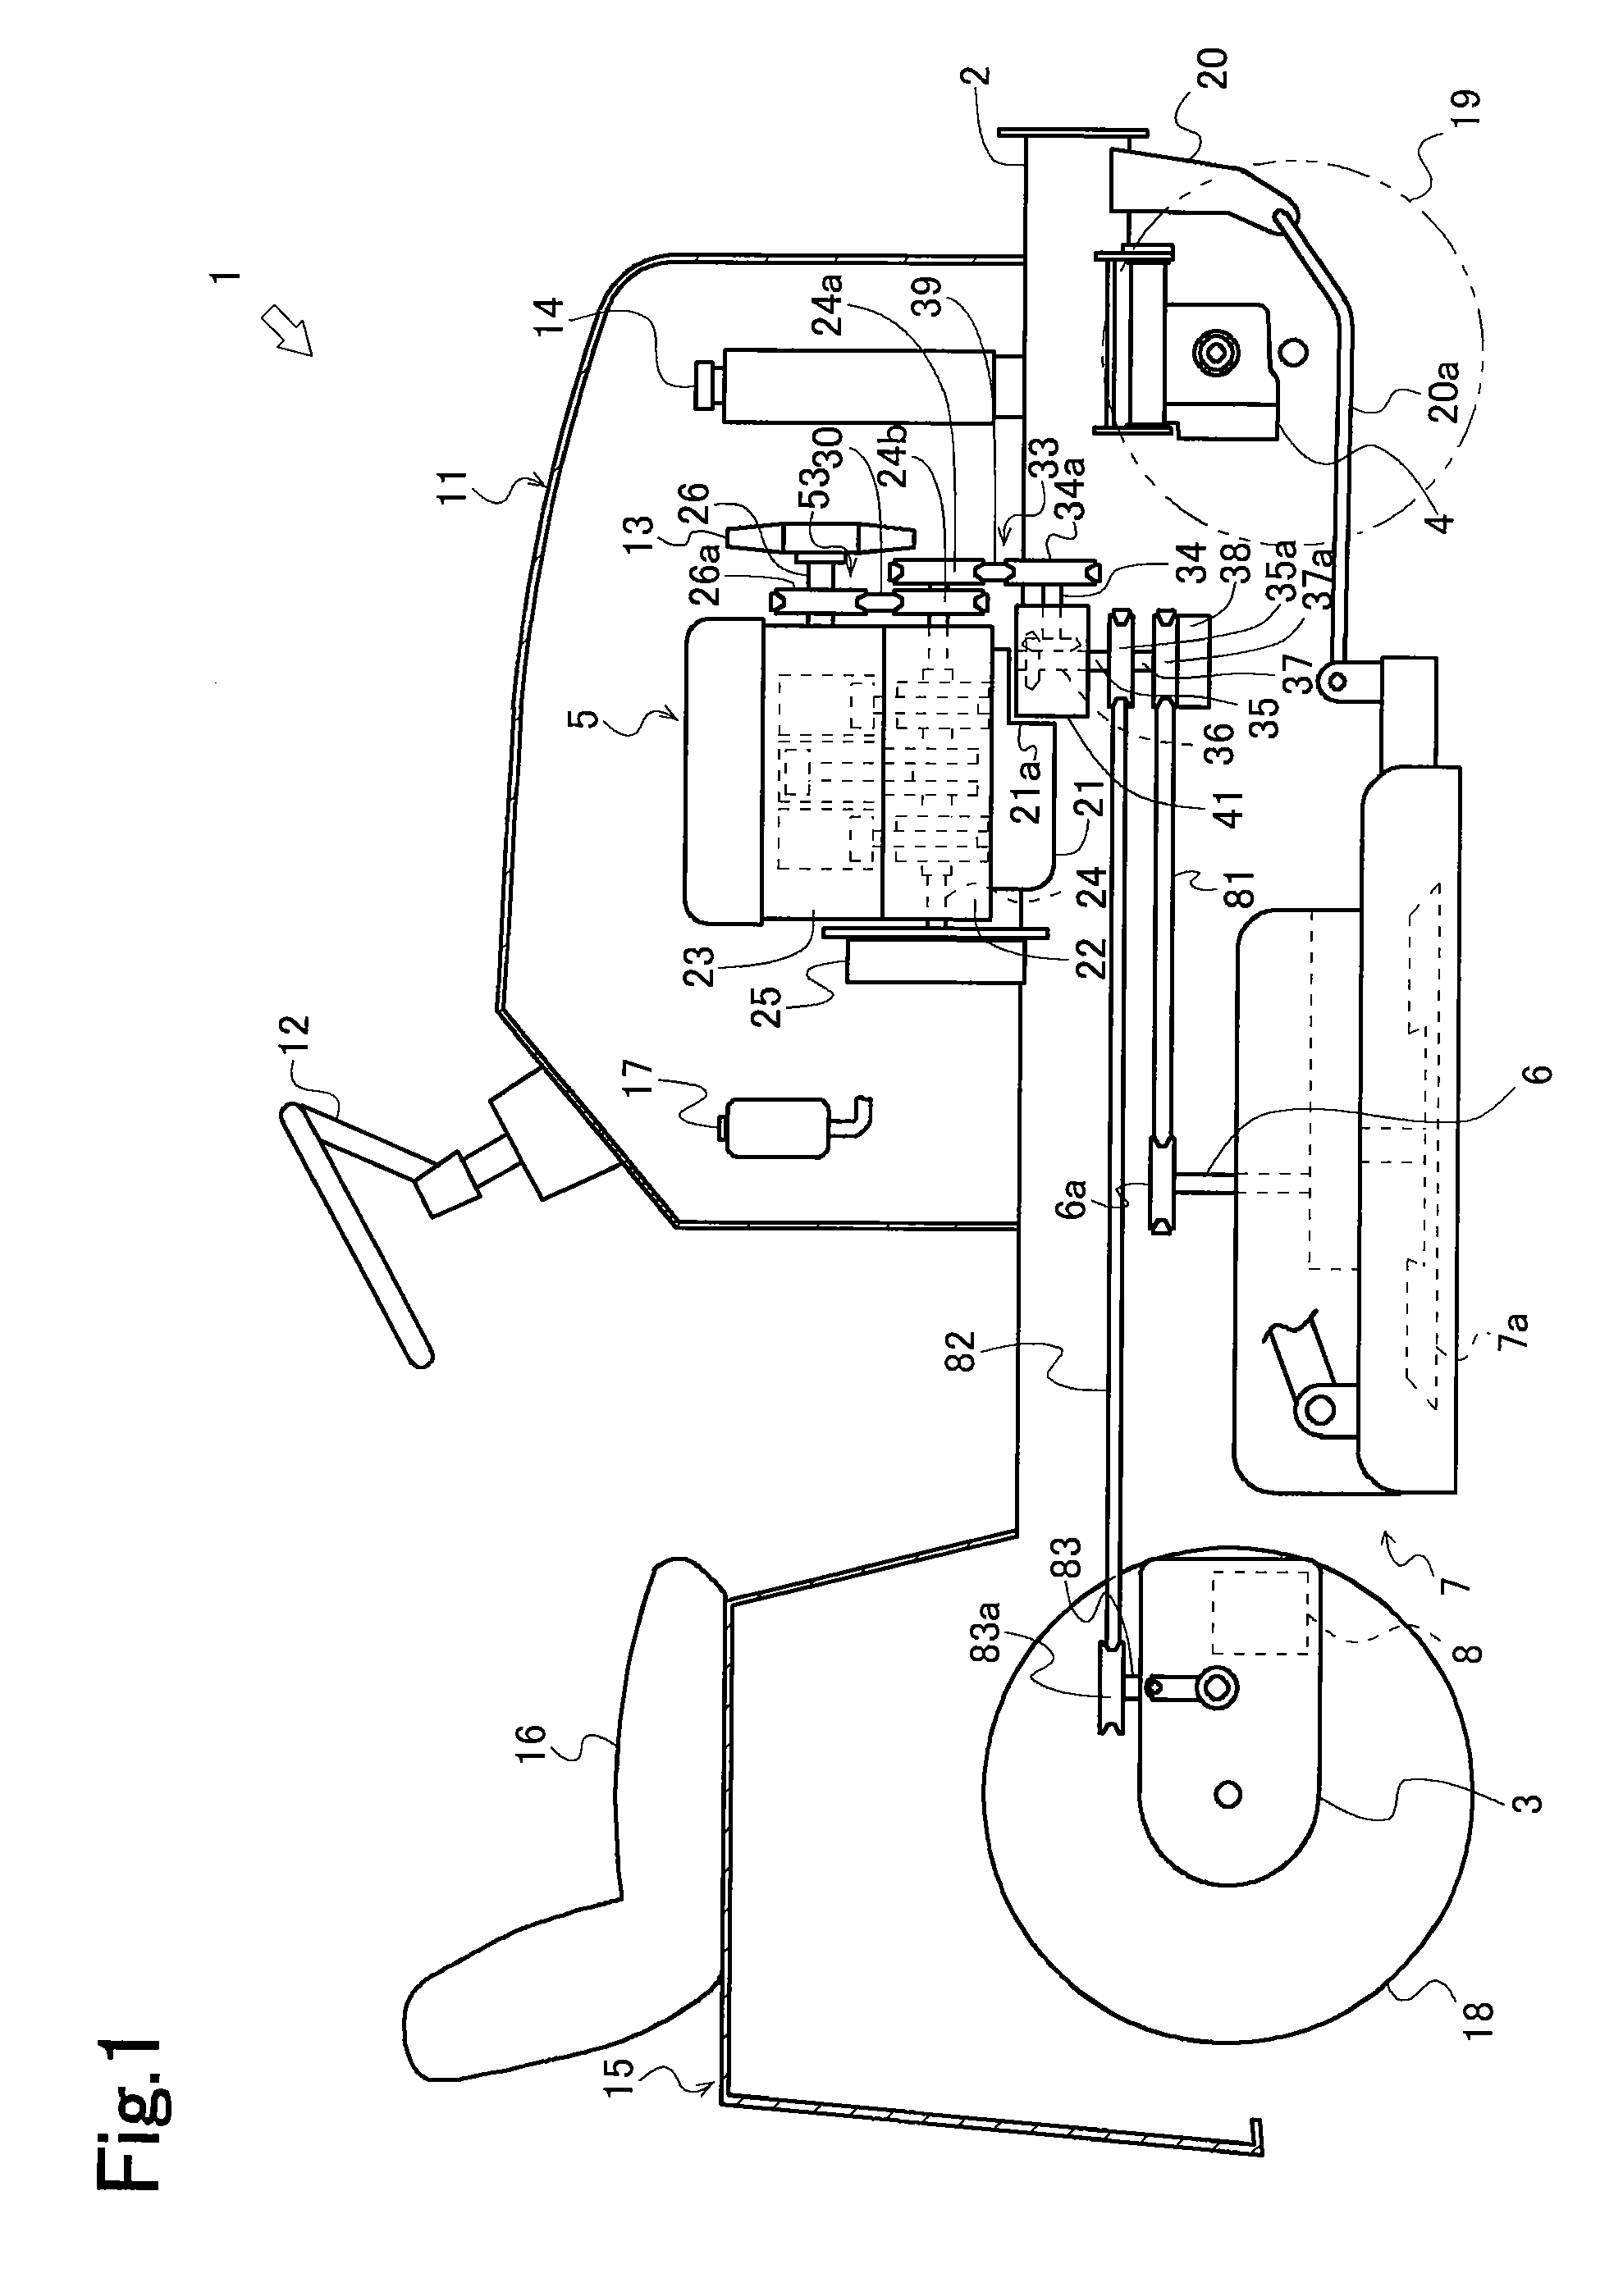 Engine and Power Transmission Device